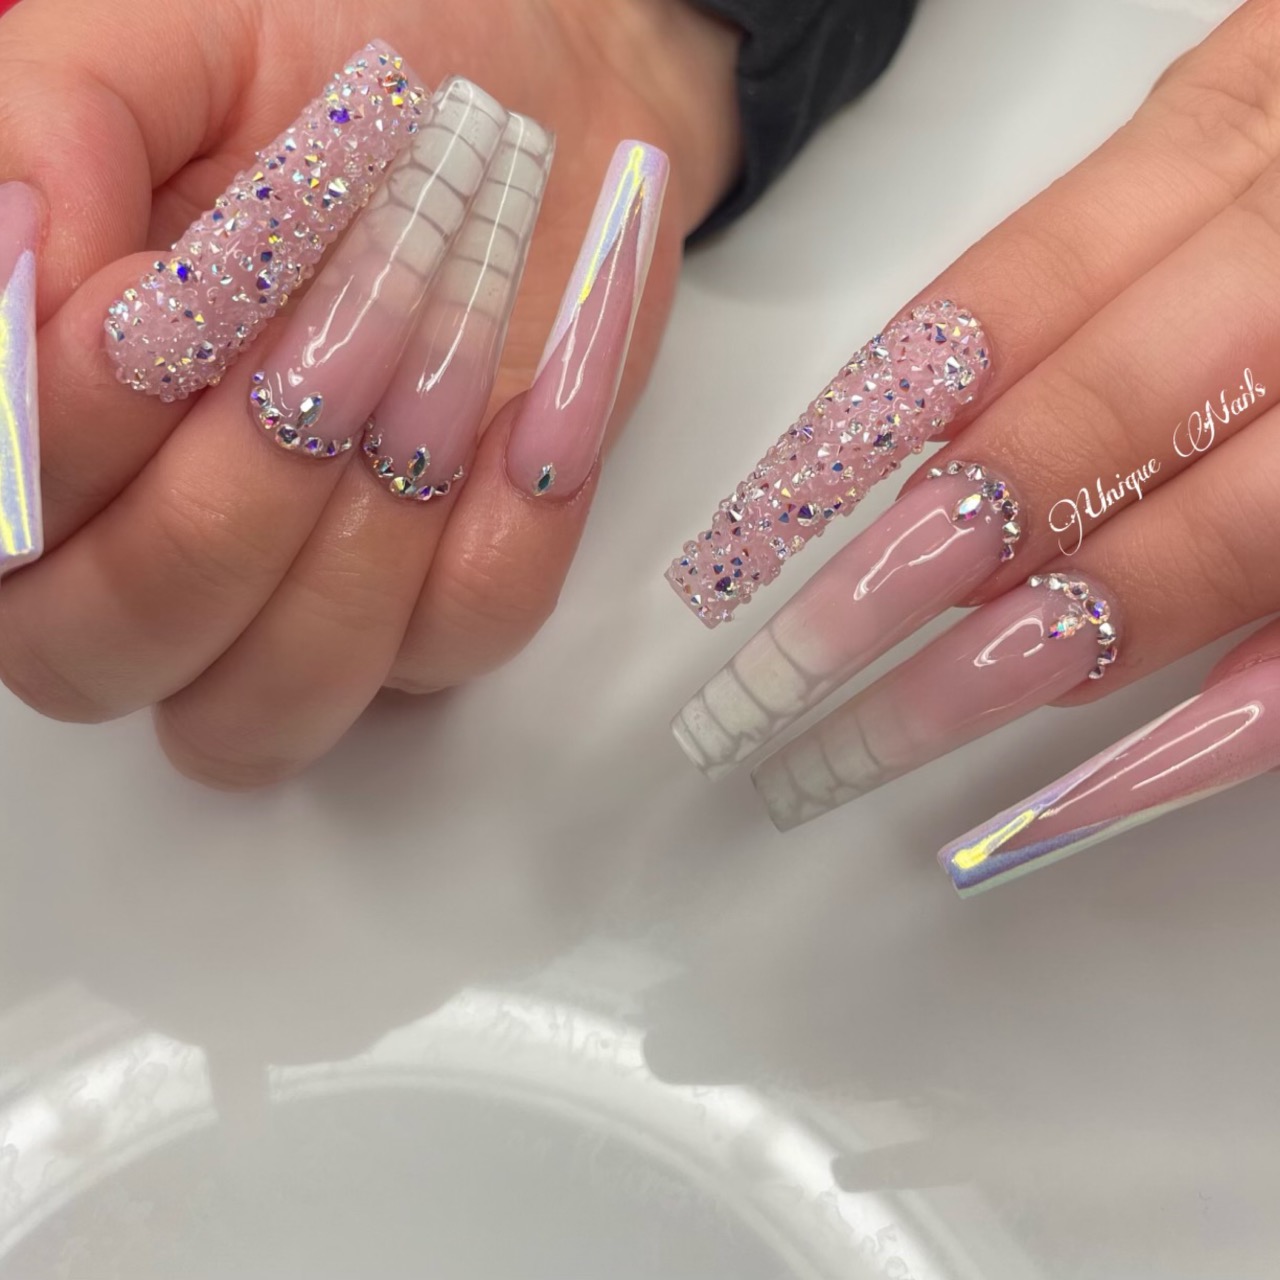 15 Unique Nail Designs for Your Next Appointment